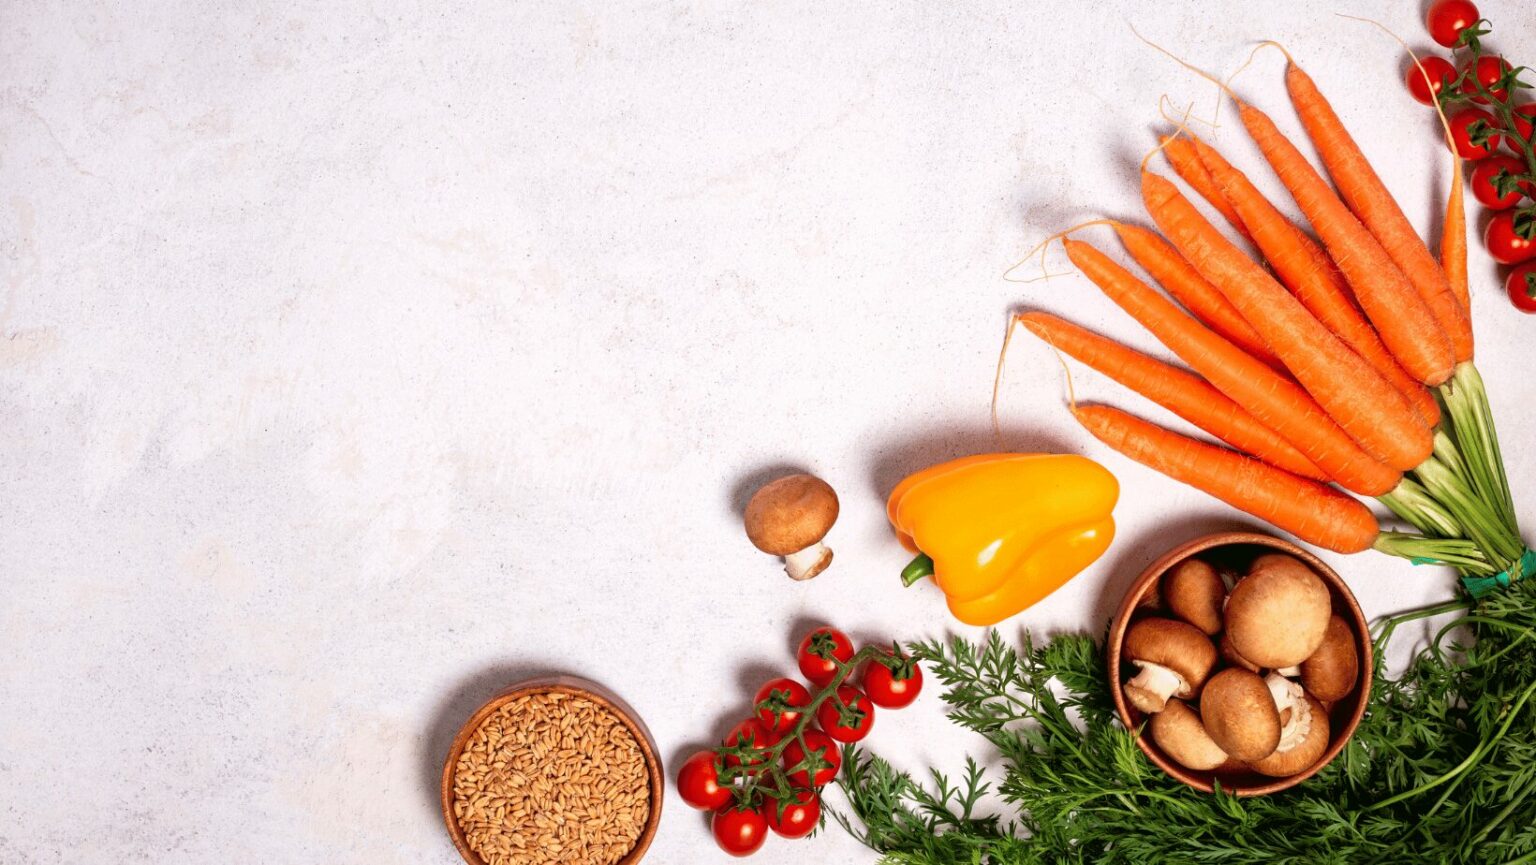 veganuary webinar cover picture with vegetables on a surface